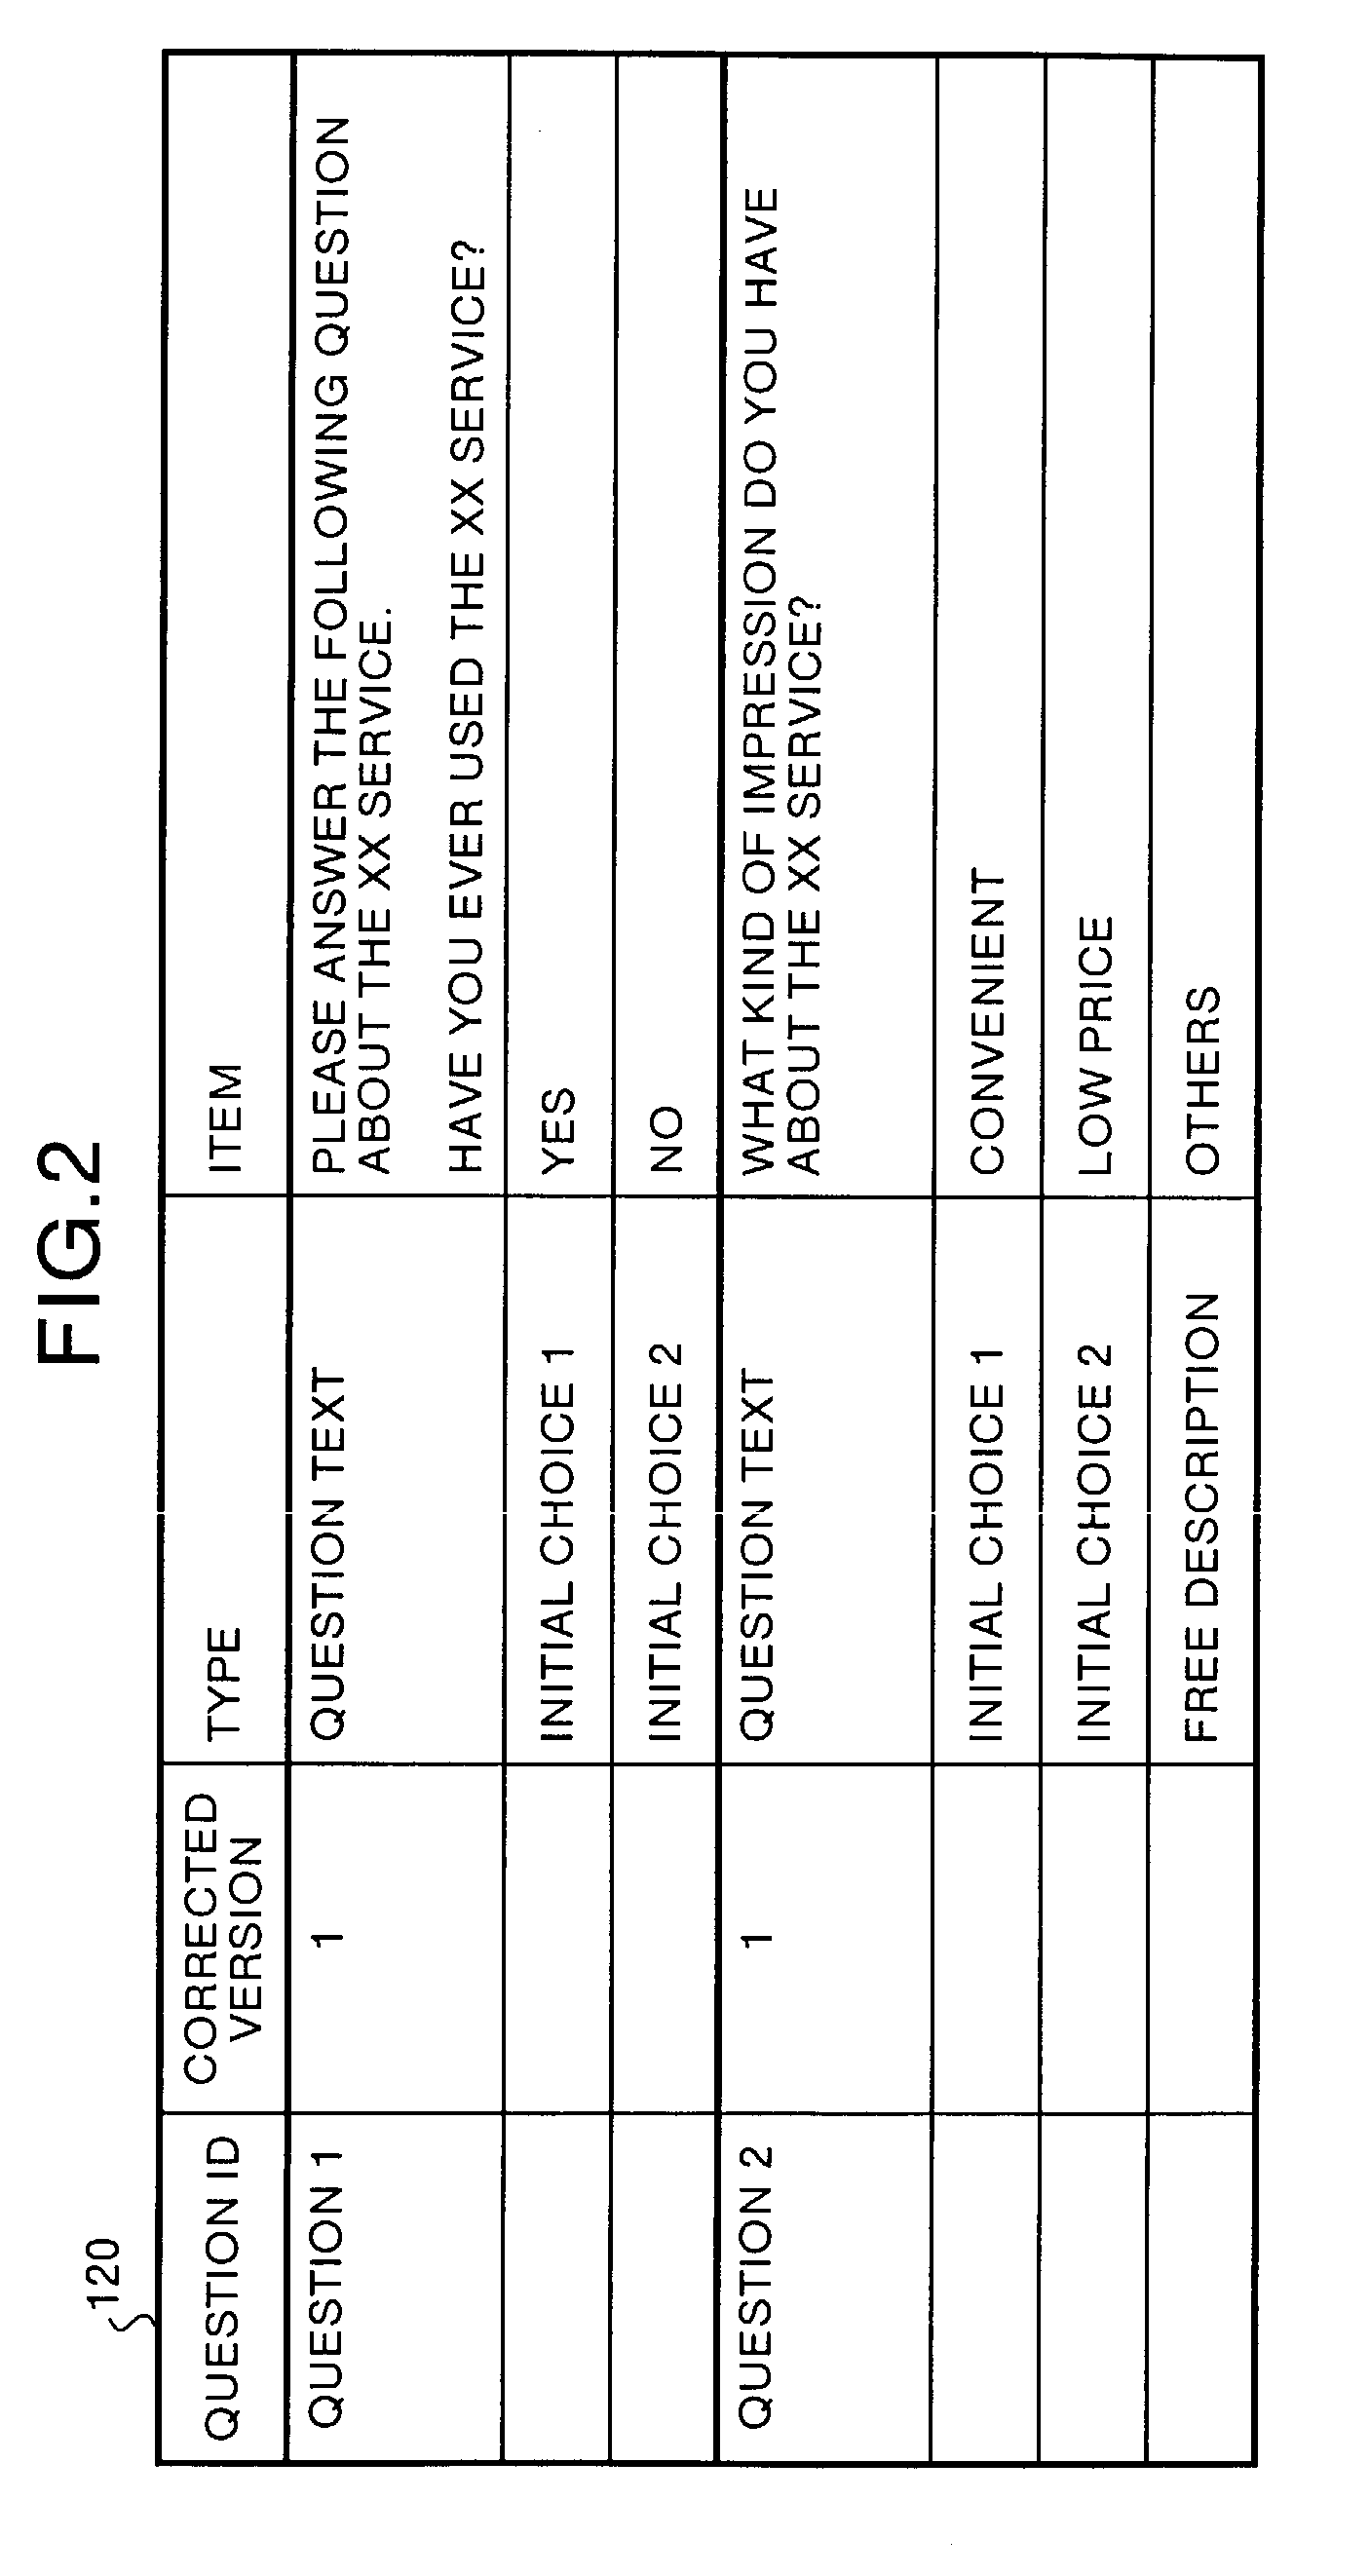 Program, apparatus, and method of conducting questionnaire